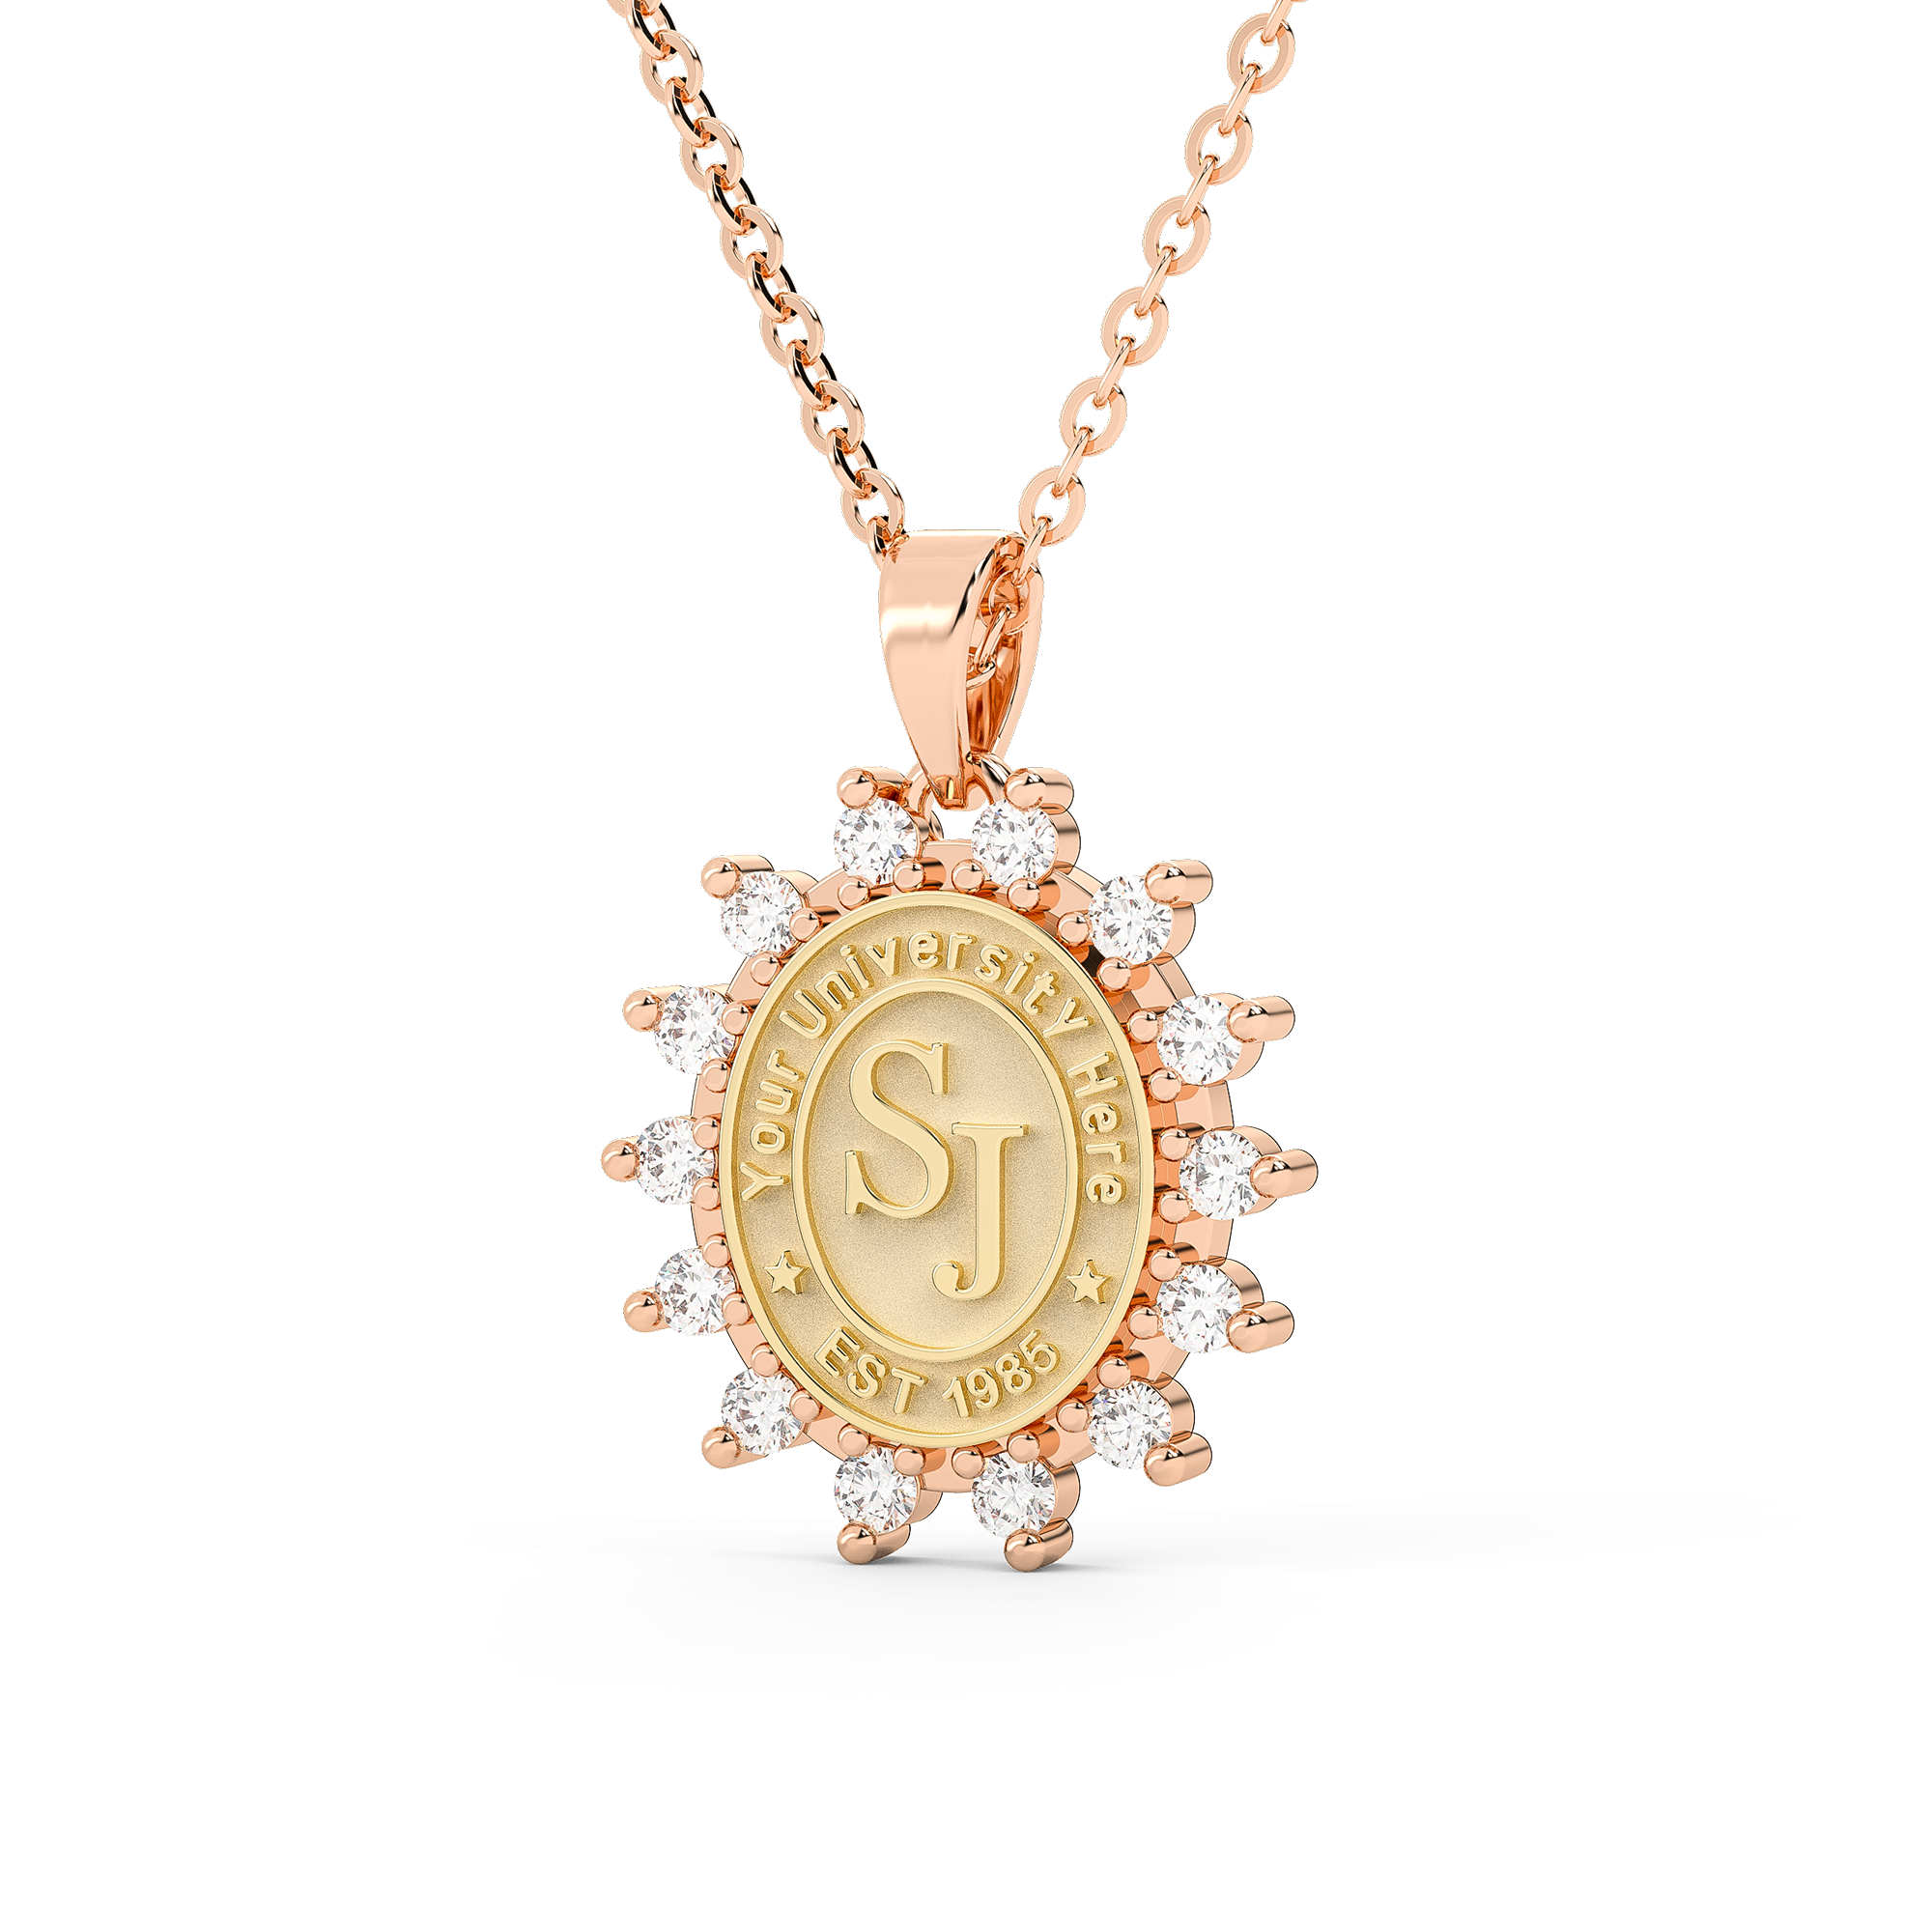 Neelima Jwels - A Treasure to Cherish Our Neelima Jewels Collection 18kt  necklace is a treasure that will be passed down through generations,  symbolizing your enduring legacy. The Neelima Jewels Collection necklace